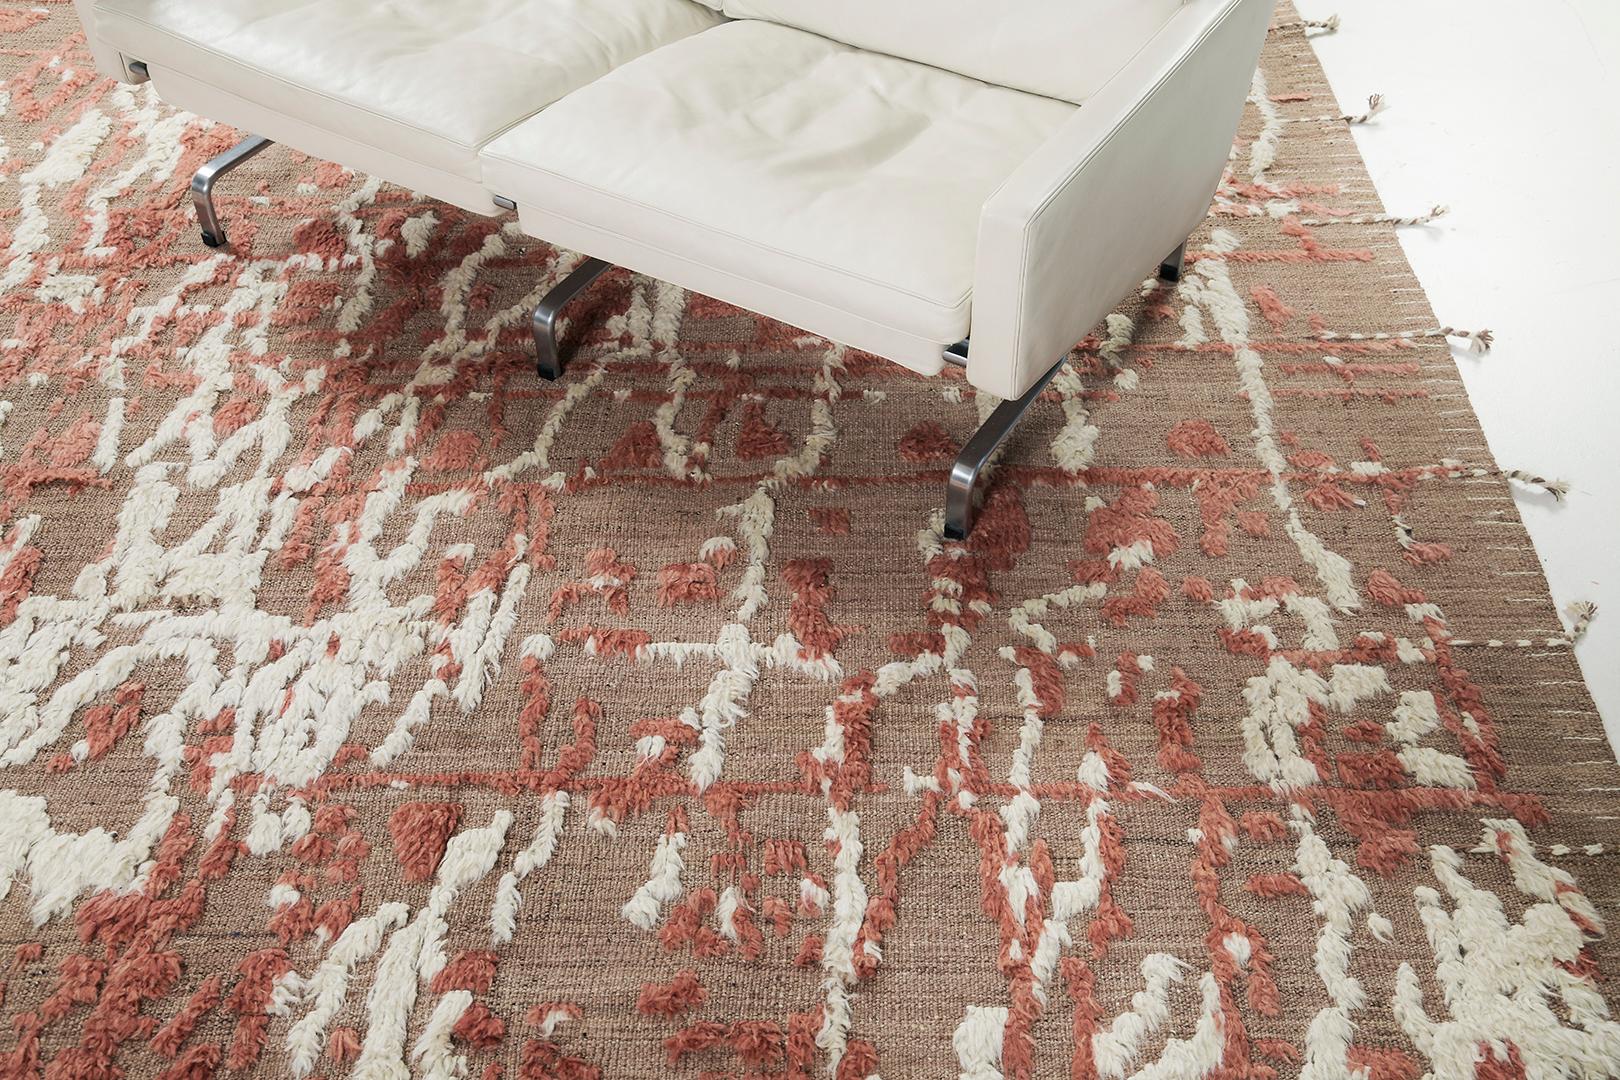 Amin’ is a vibrant plush rug in the stunning shades of khaki, coral and white. Irregular strokes brings out the character of this bewildering masterful rug. Mehraban's Atlas collection is noted for its saturated color, intuitive motifs, and